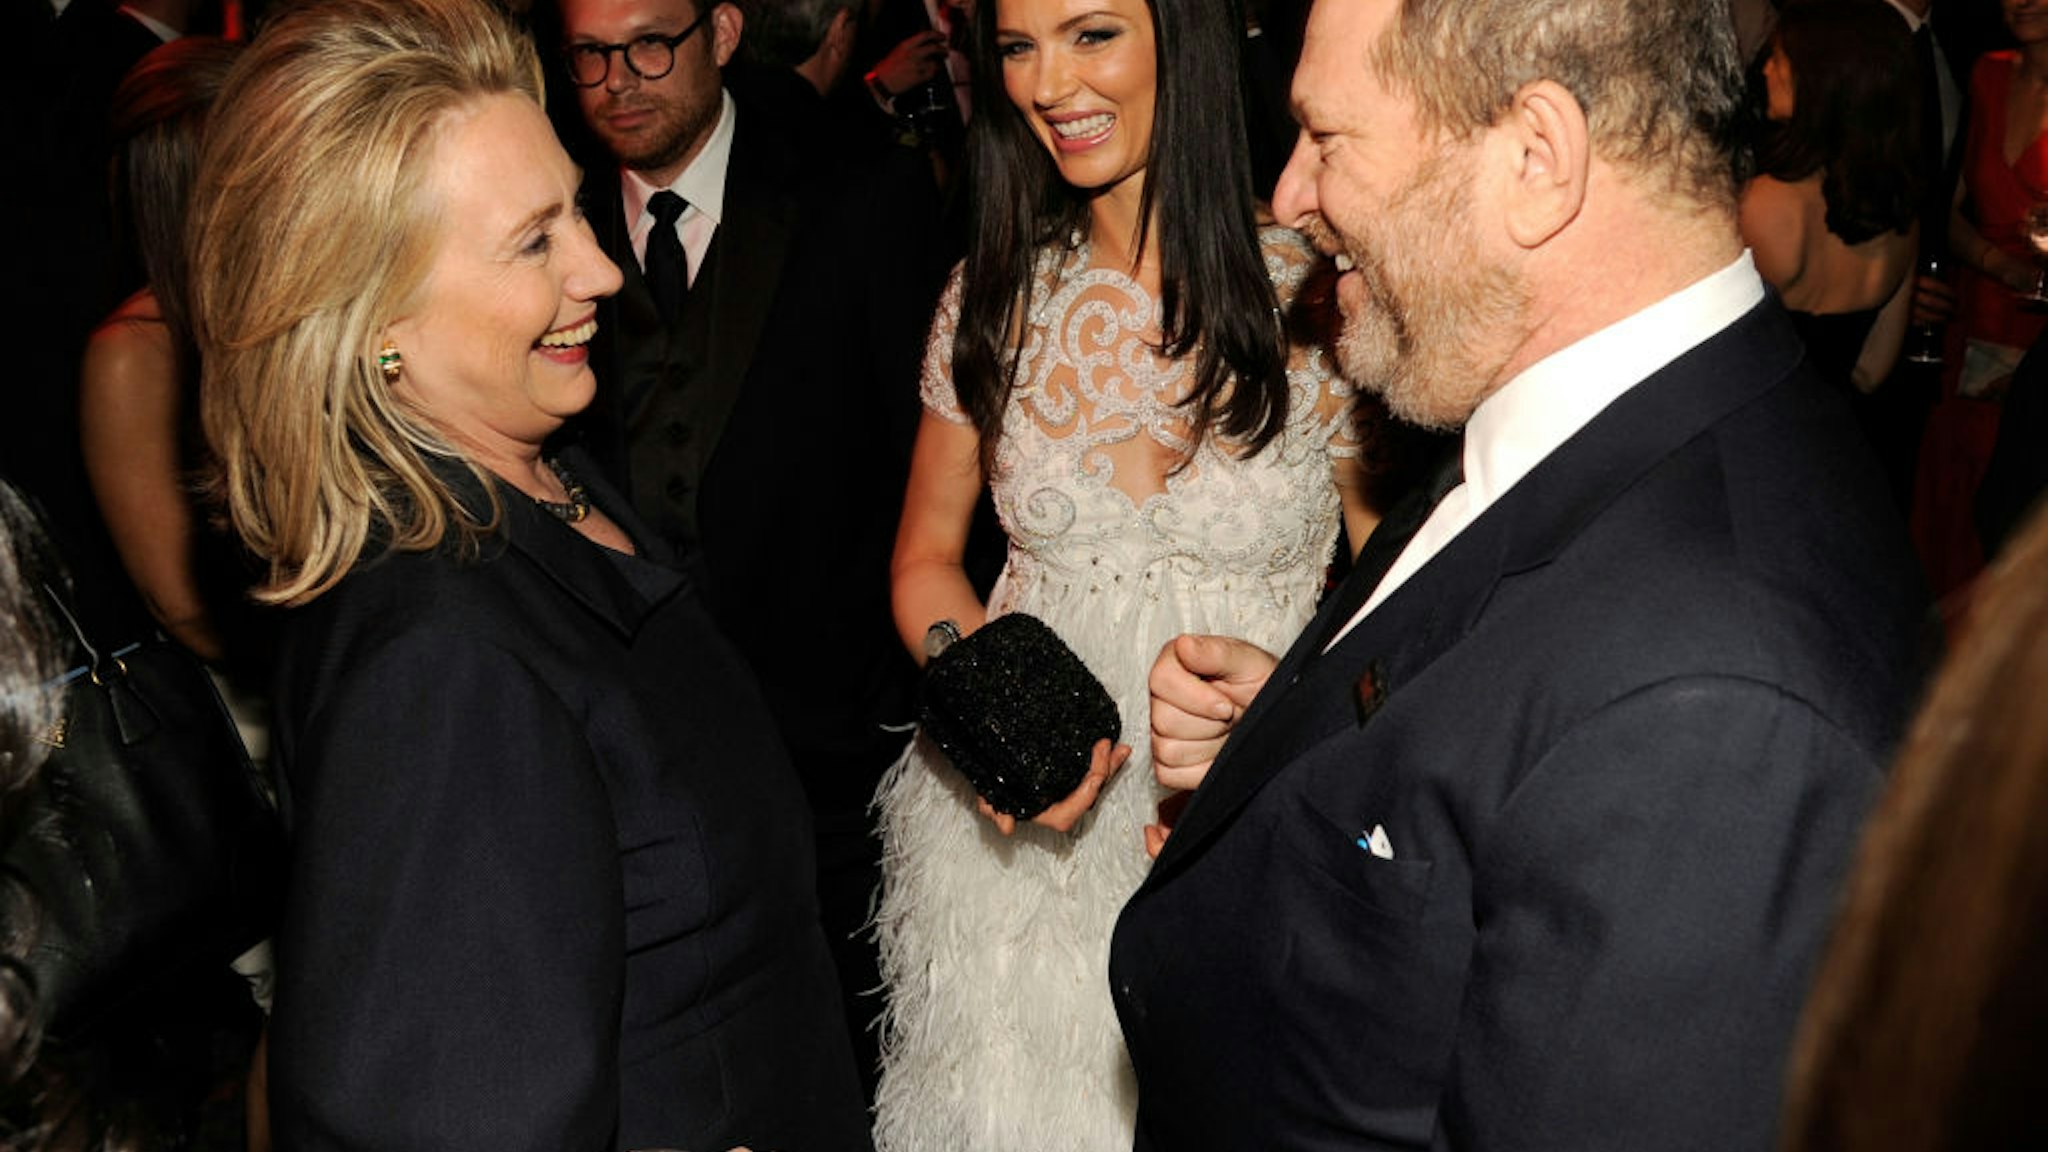 United States Secretary of State Hillary Clinton, Georgina Chapman and Harvey Weinstein attend the TIME 100 Gala celebrating TIME'S 100 Most Infuential People In The World at Jazz at Lincoln Center on April 24, 2012 in New York City.